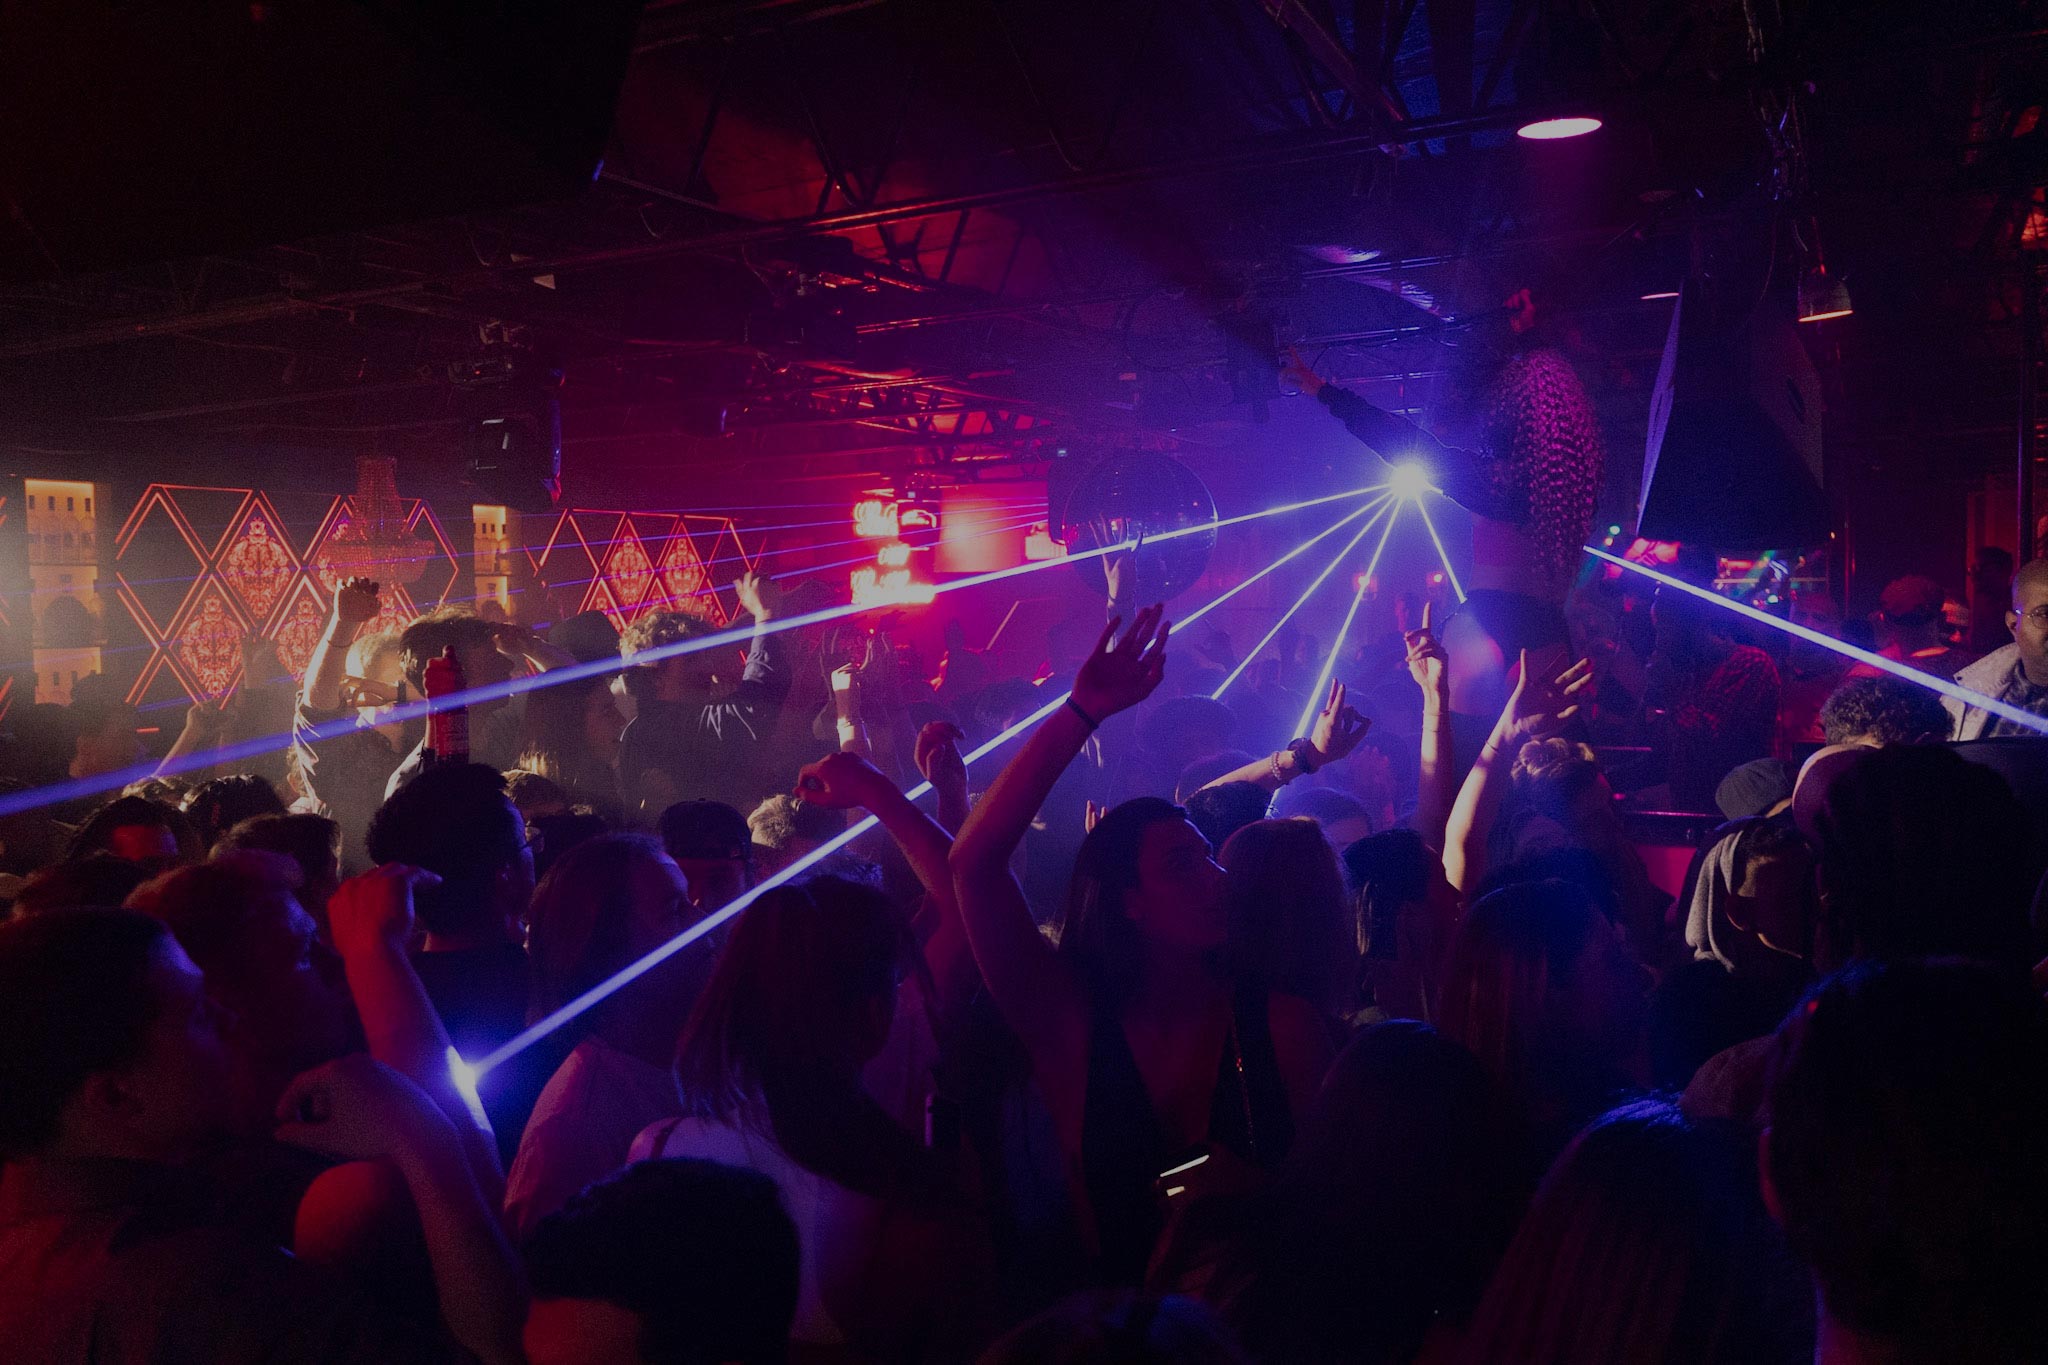 People dancing and listening to music in nightclub